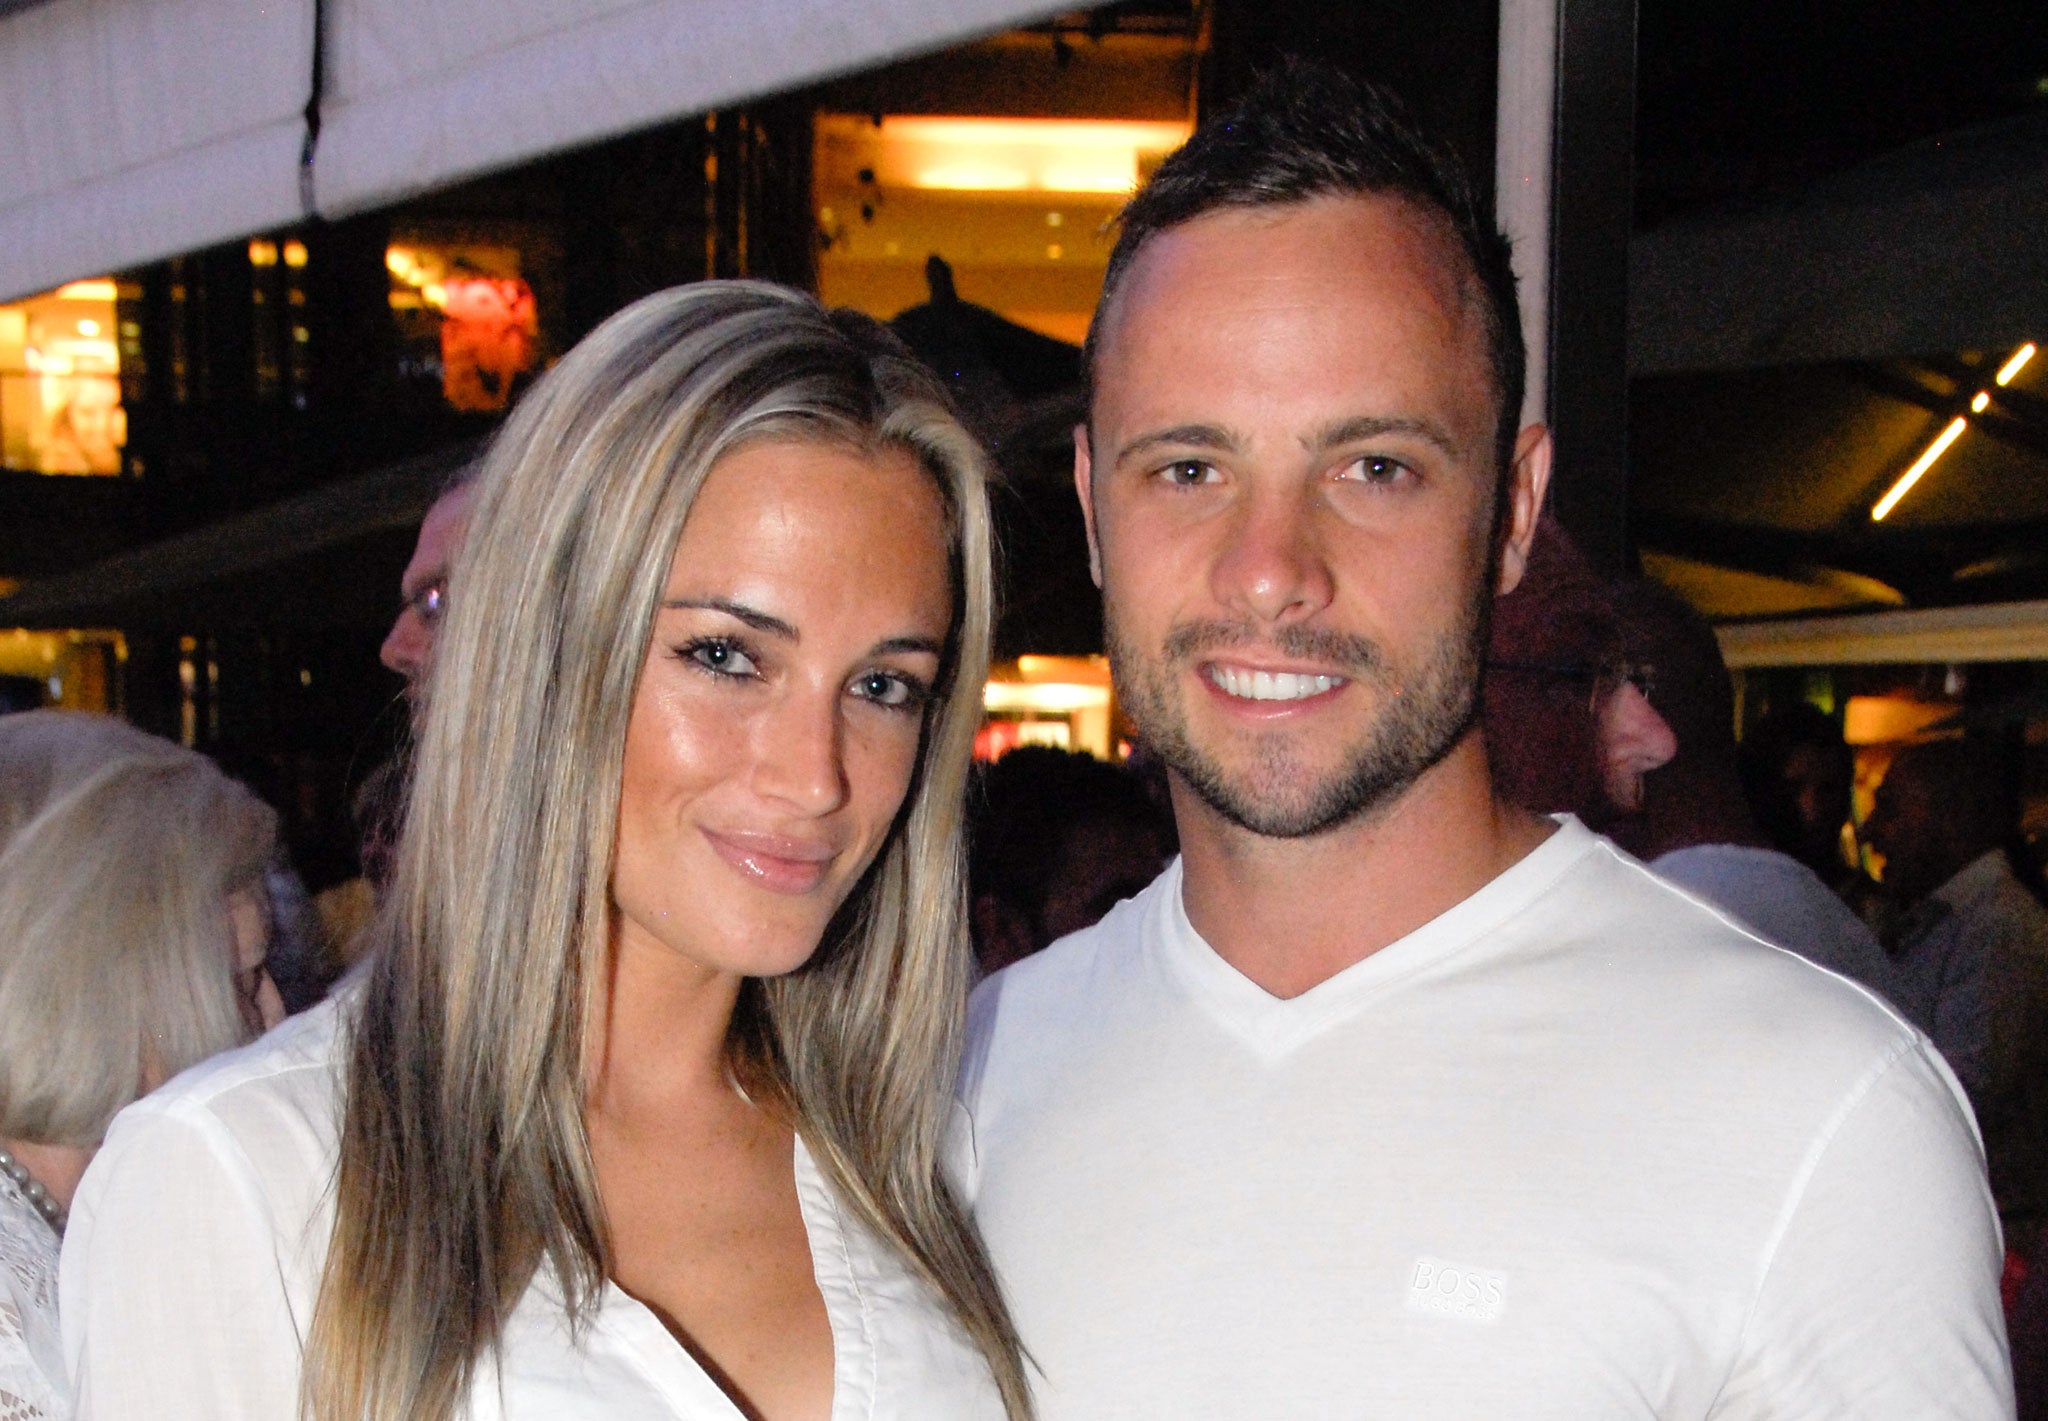 South African model Reeva Steenkamp (left), with her former boyfriend Oscar Pistorius, who stands accused of her murder